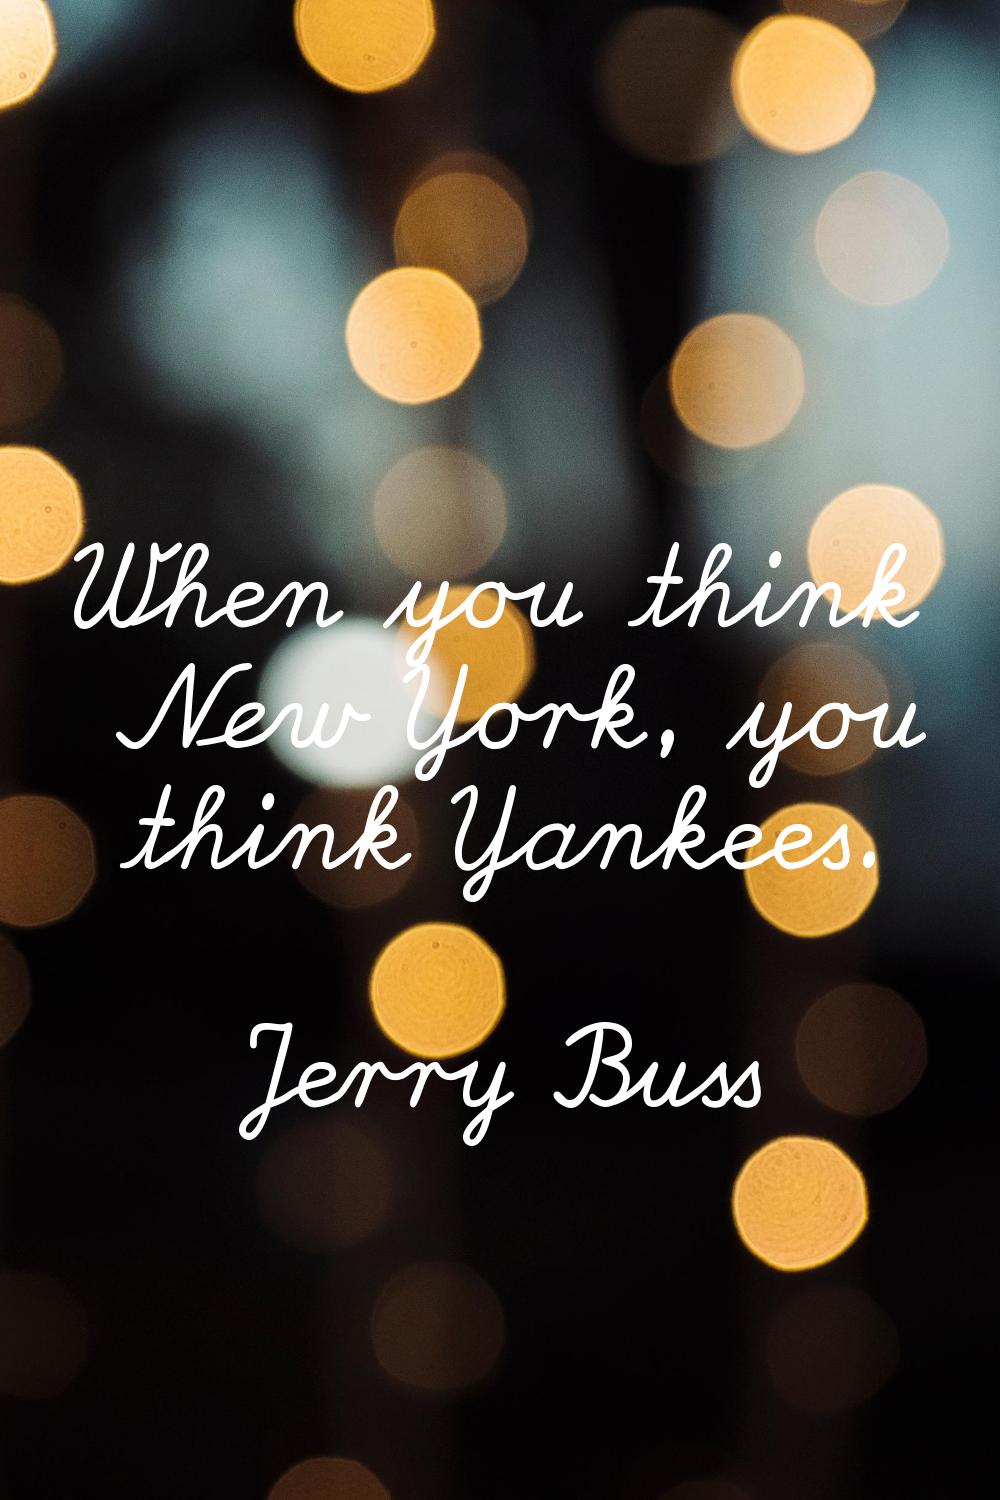 When you think New York, you think Yankees.